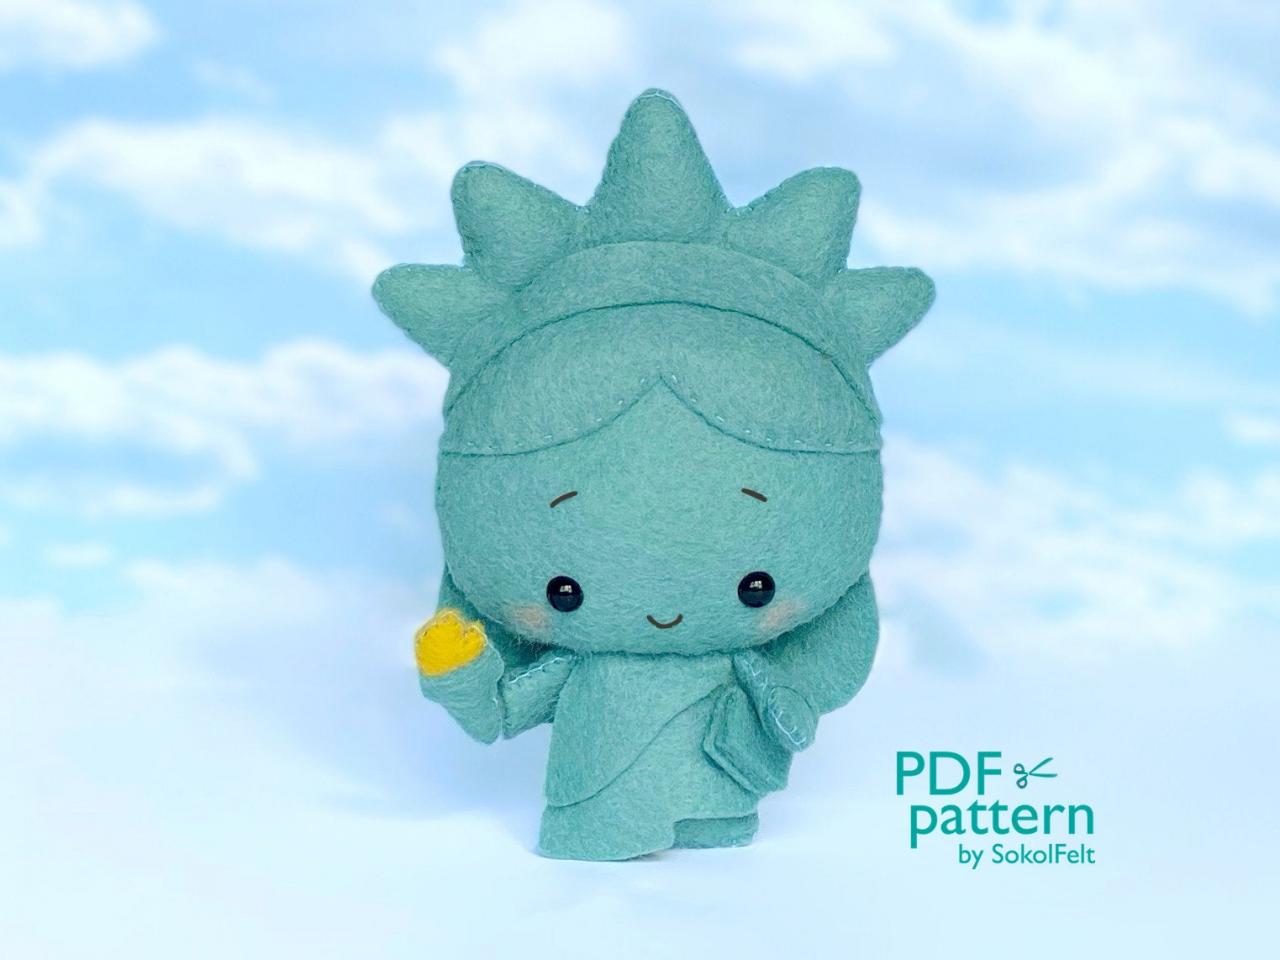 Statue Of Liberty Felt Toy Sewing Pdf And Svg Pattern, Plush Toy Sewing Pdf Tutorial, Independence Day Gift